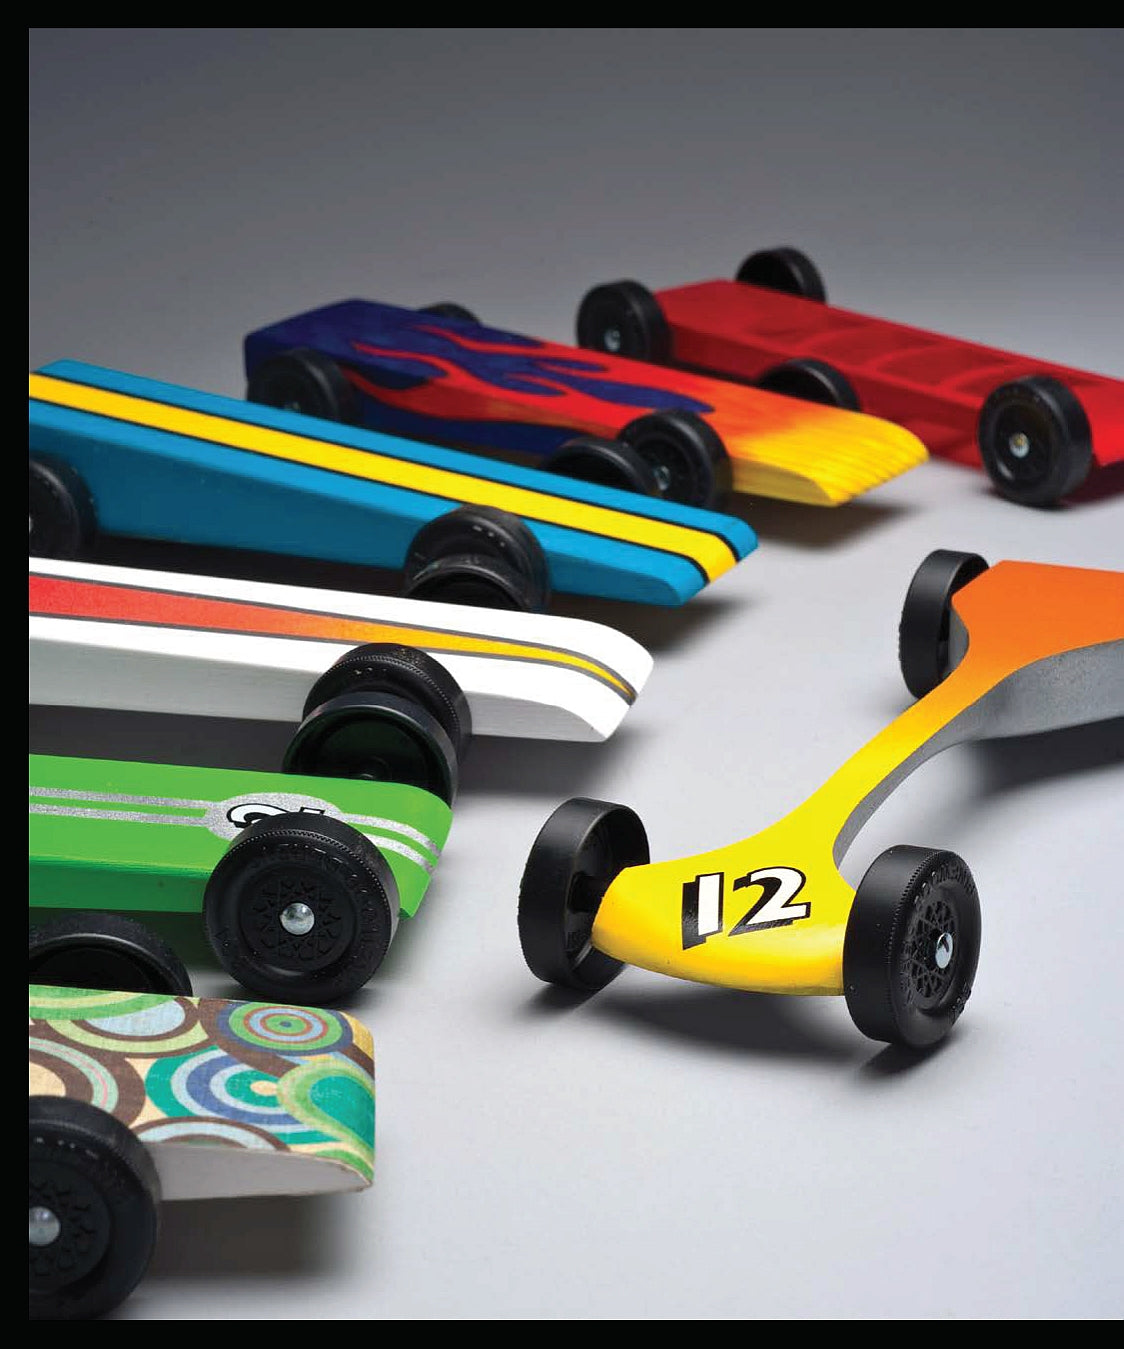 Building the Fastest Pinewood Derby Car